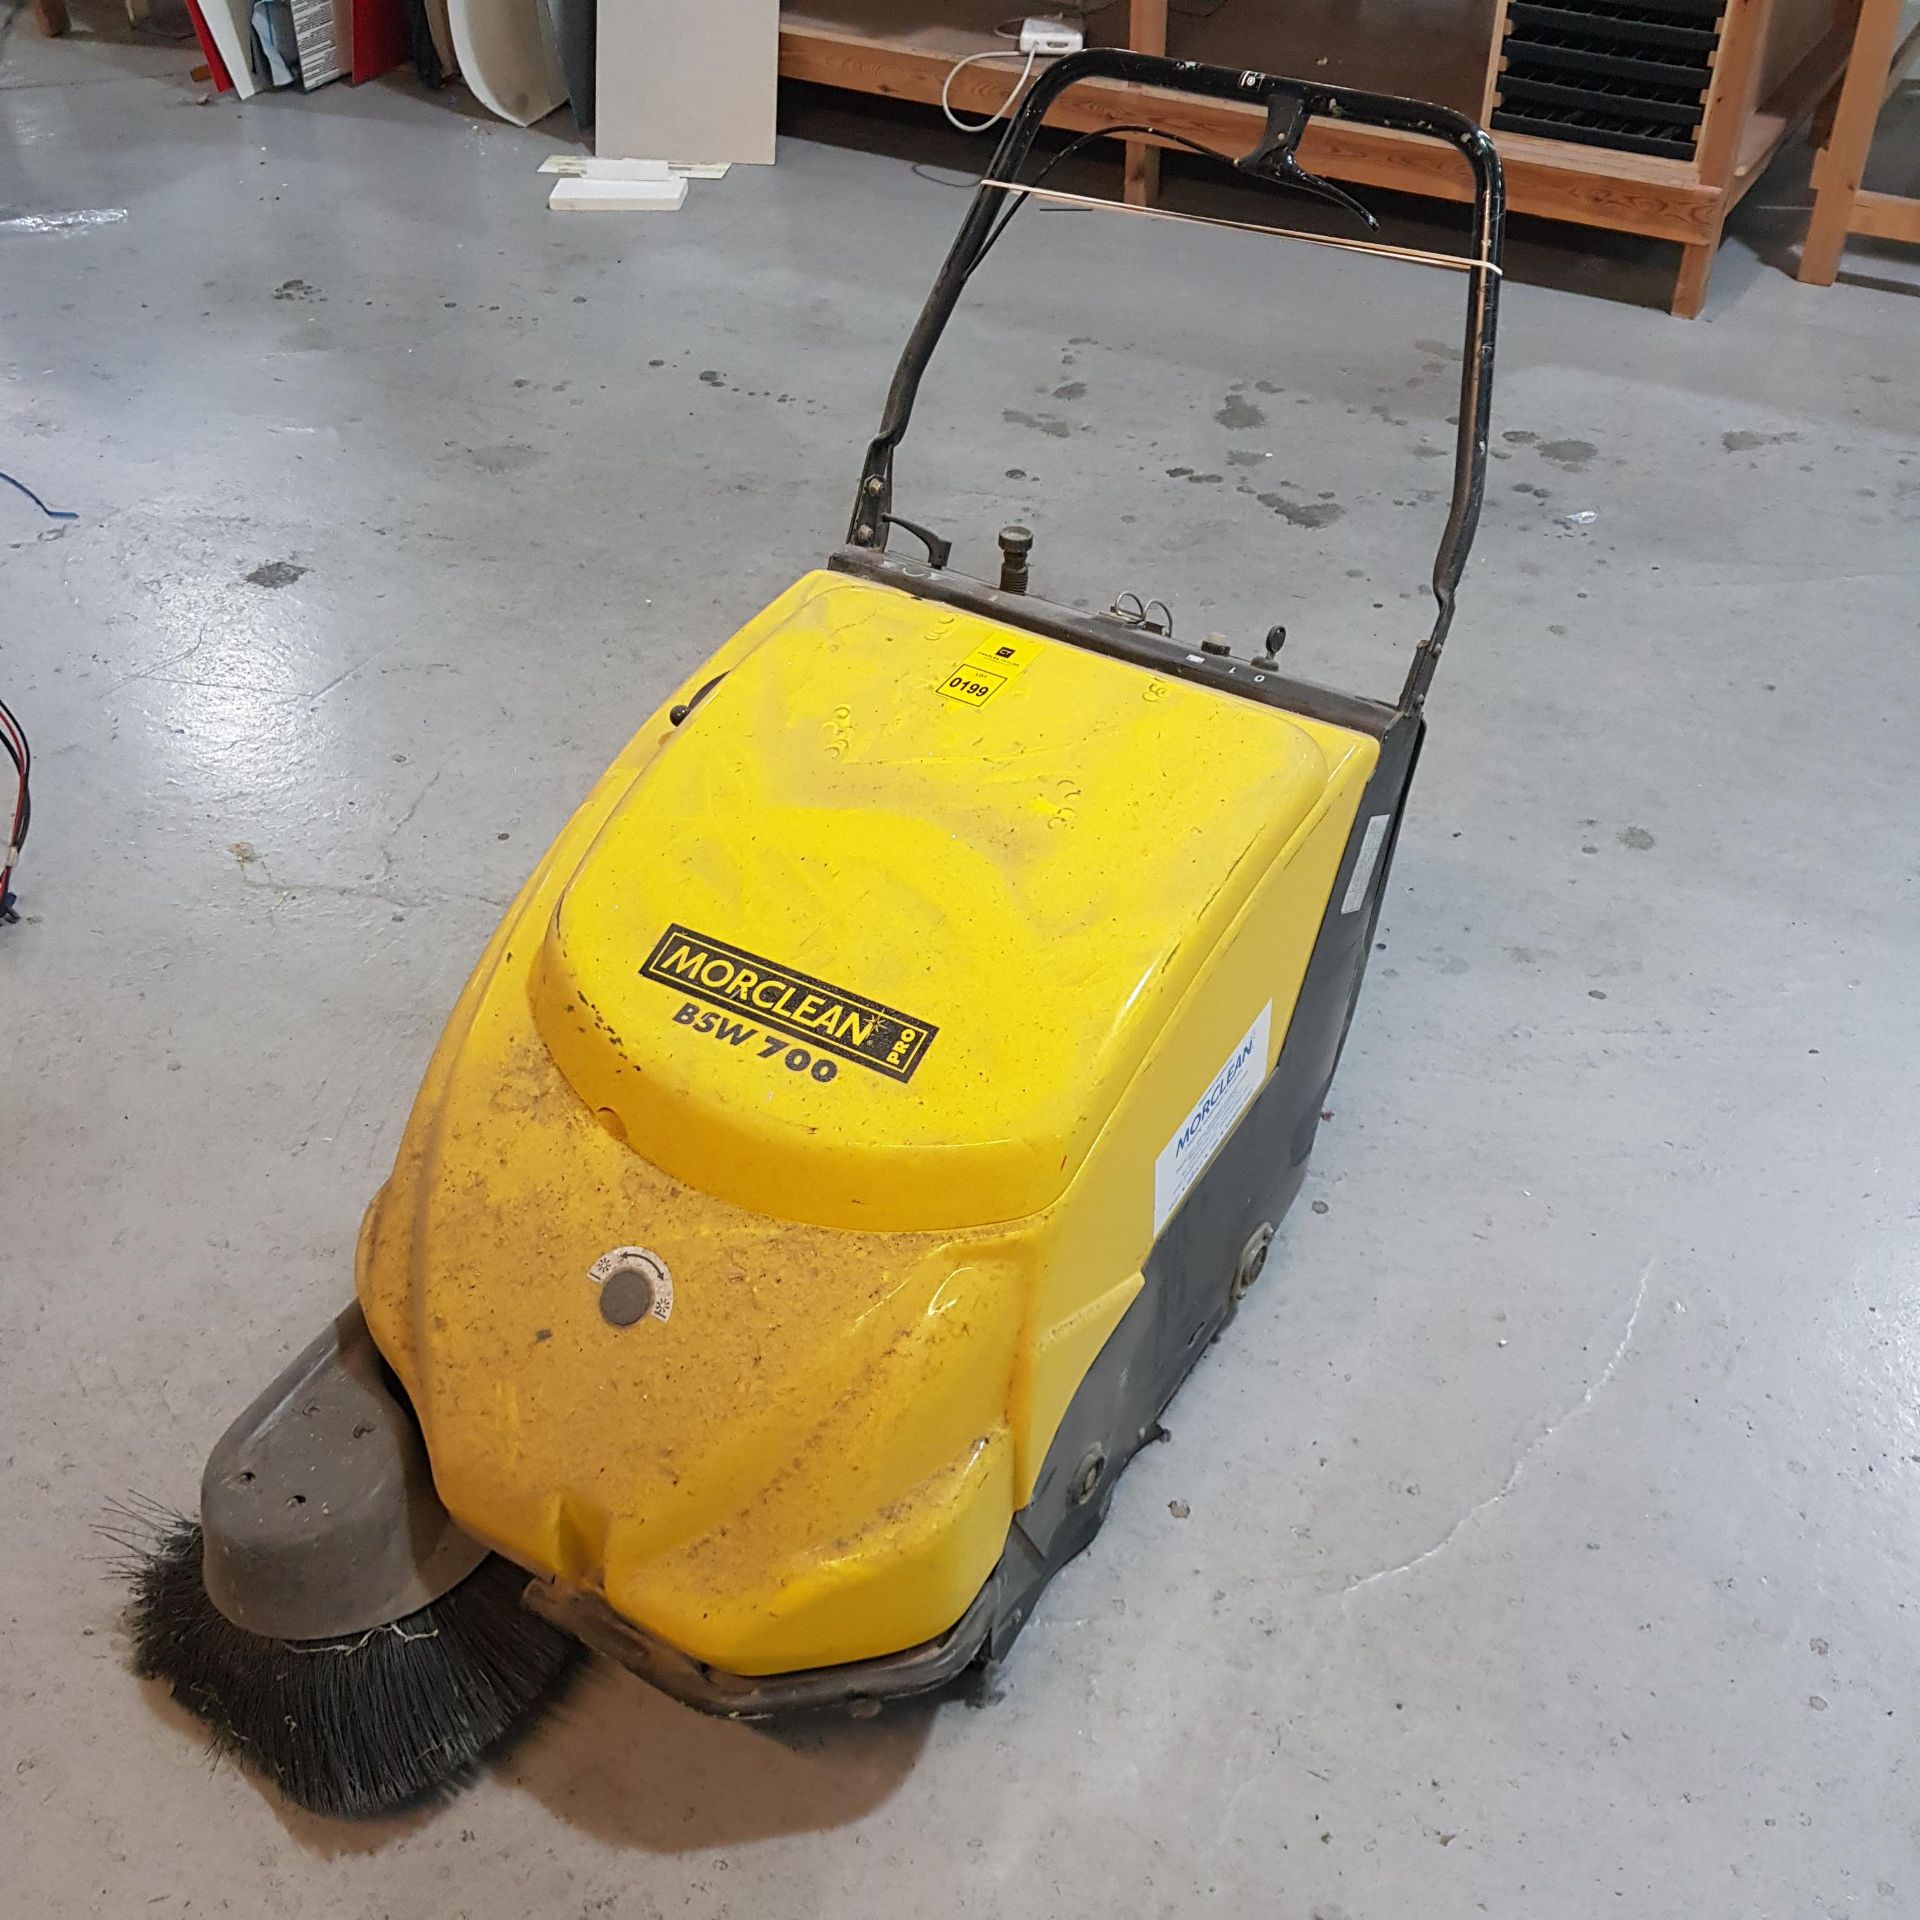 MORCLEAN PRO BSW700 WALK BEHIND FLOOR CLEANER (ASSETS LOCATED IN DENTON, MANCHESTER. VIEWING - Image 2 of 4